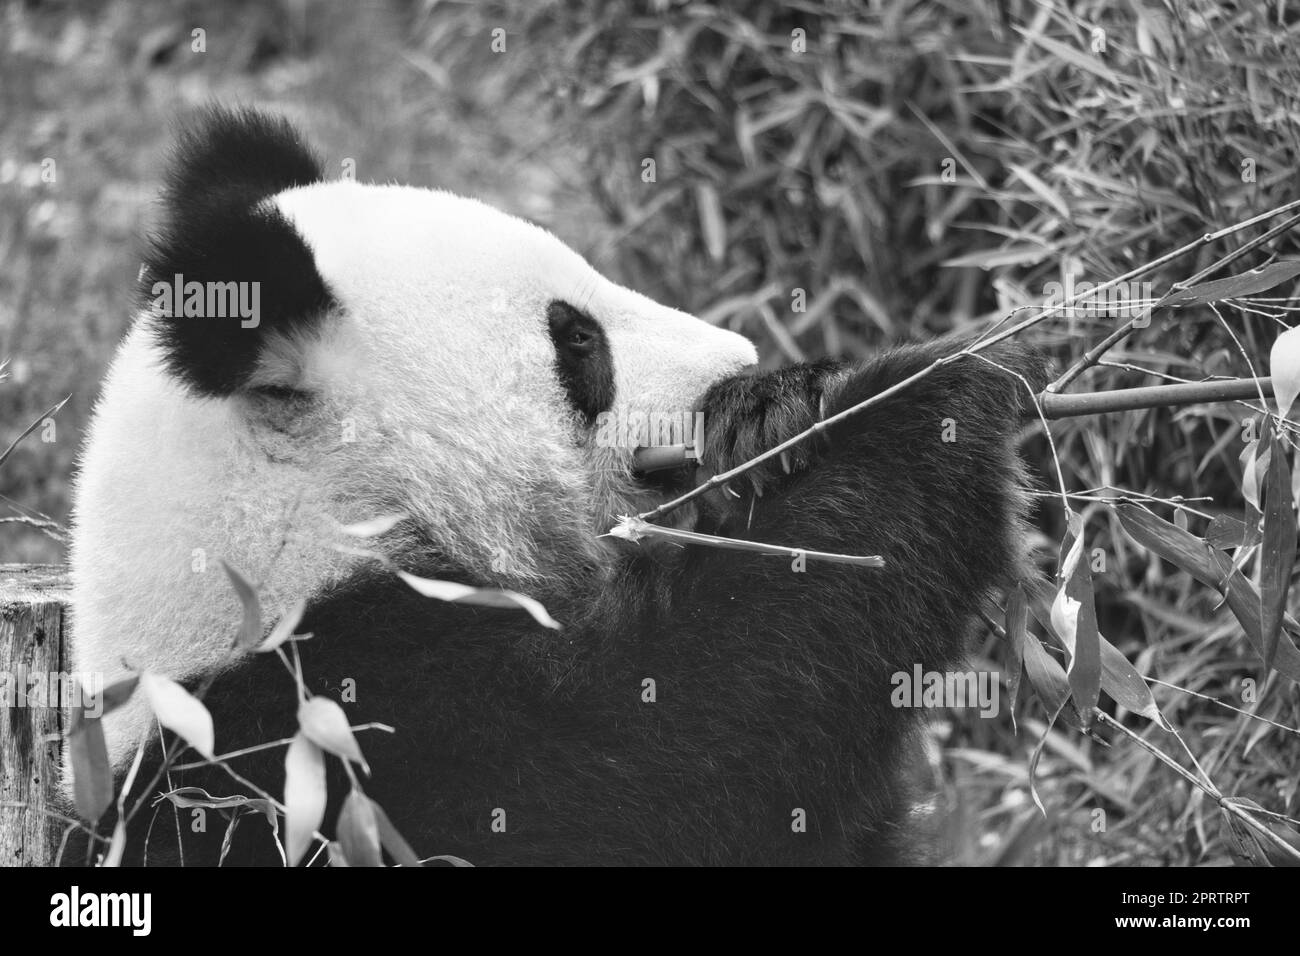 big panda in black and white, sitting eating bamboo. Endangered species. Stock Photo